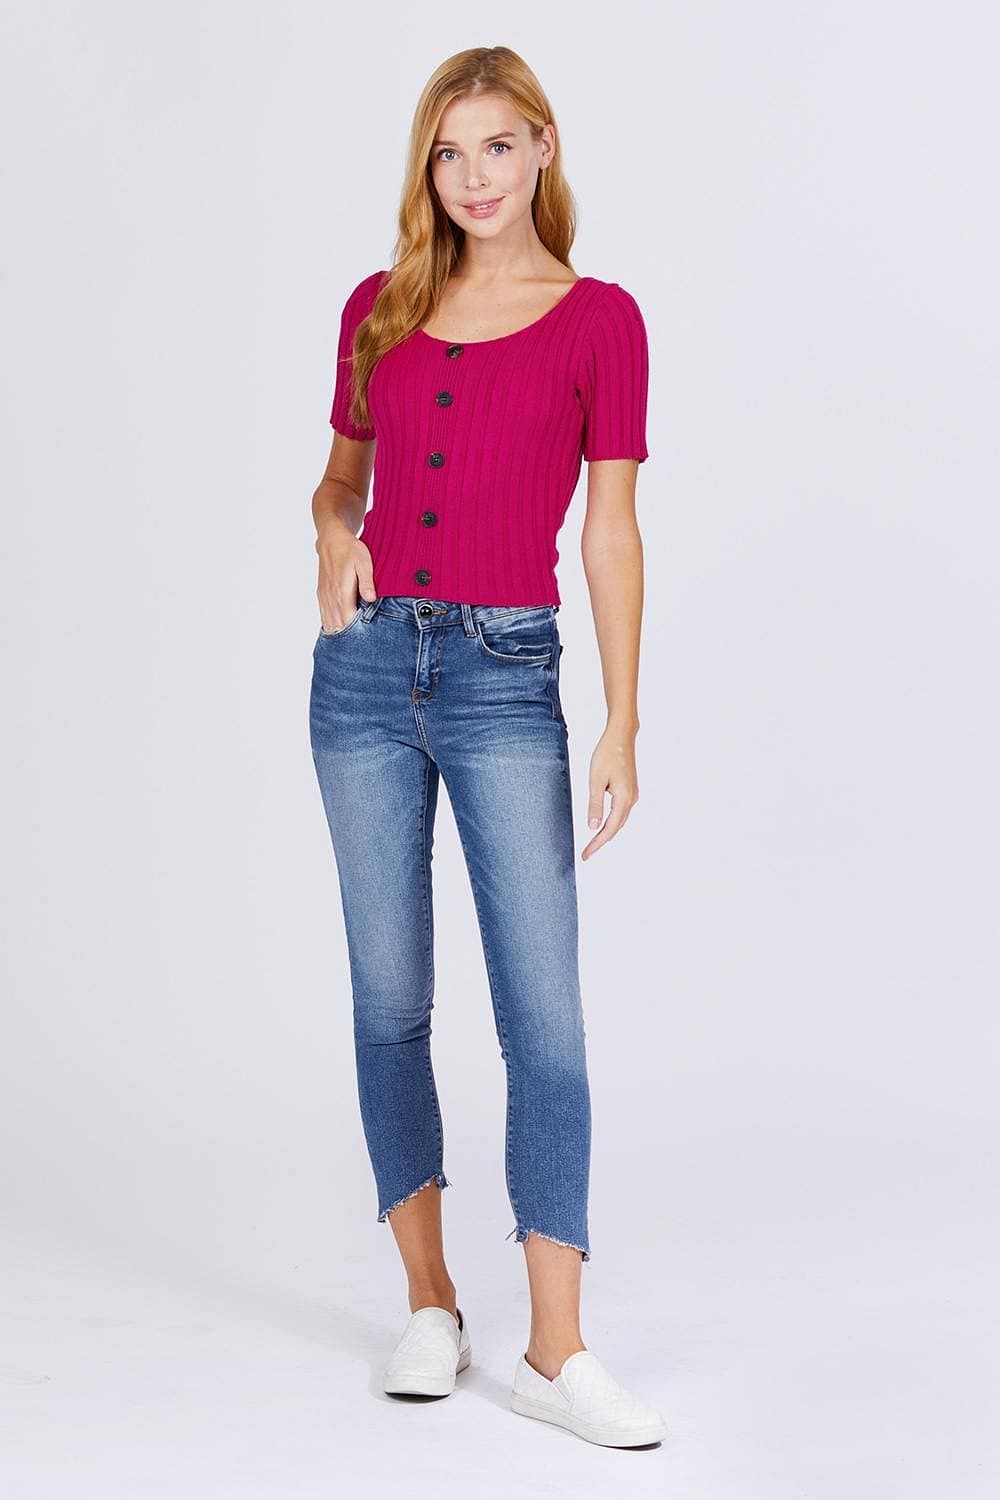 Fuchsia Short Sleeve Rib Knitted Sweater - Shopping Therapy, LLC Top